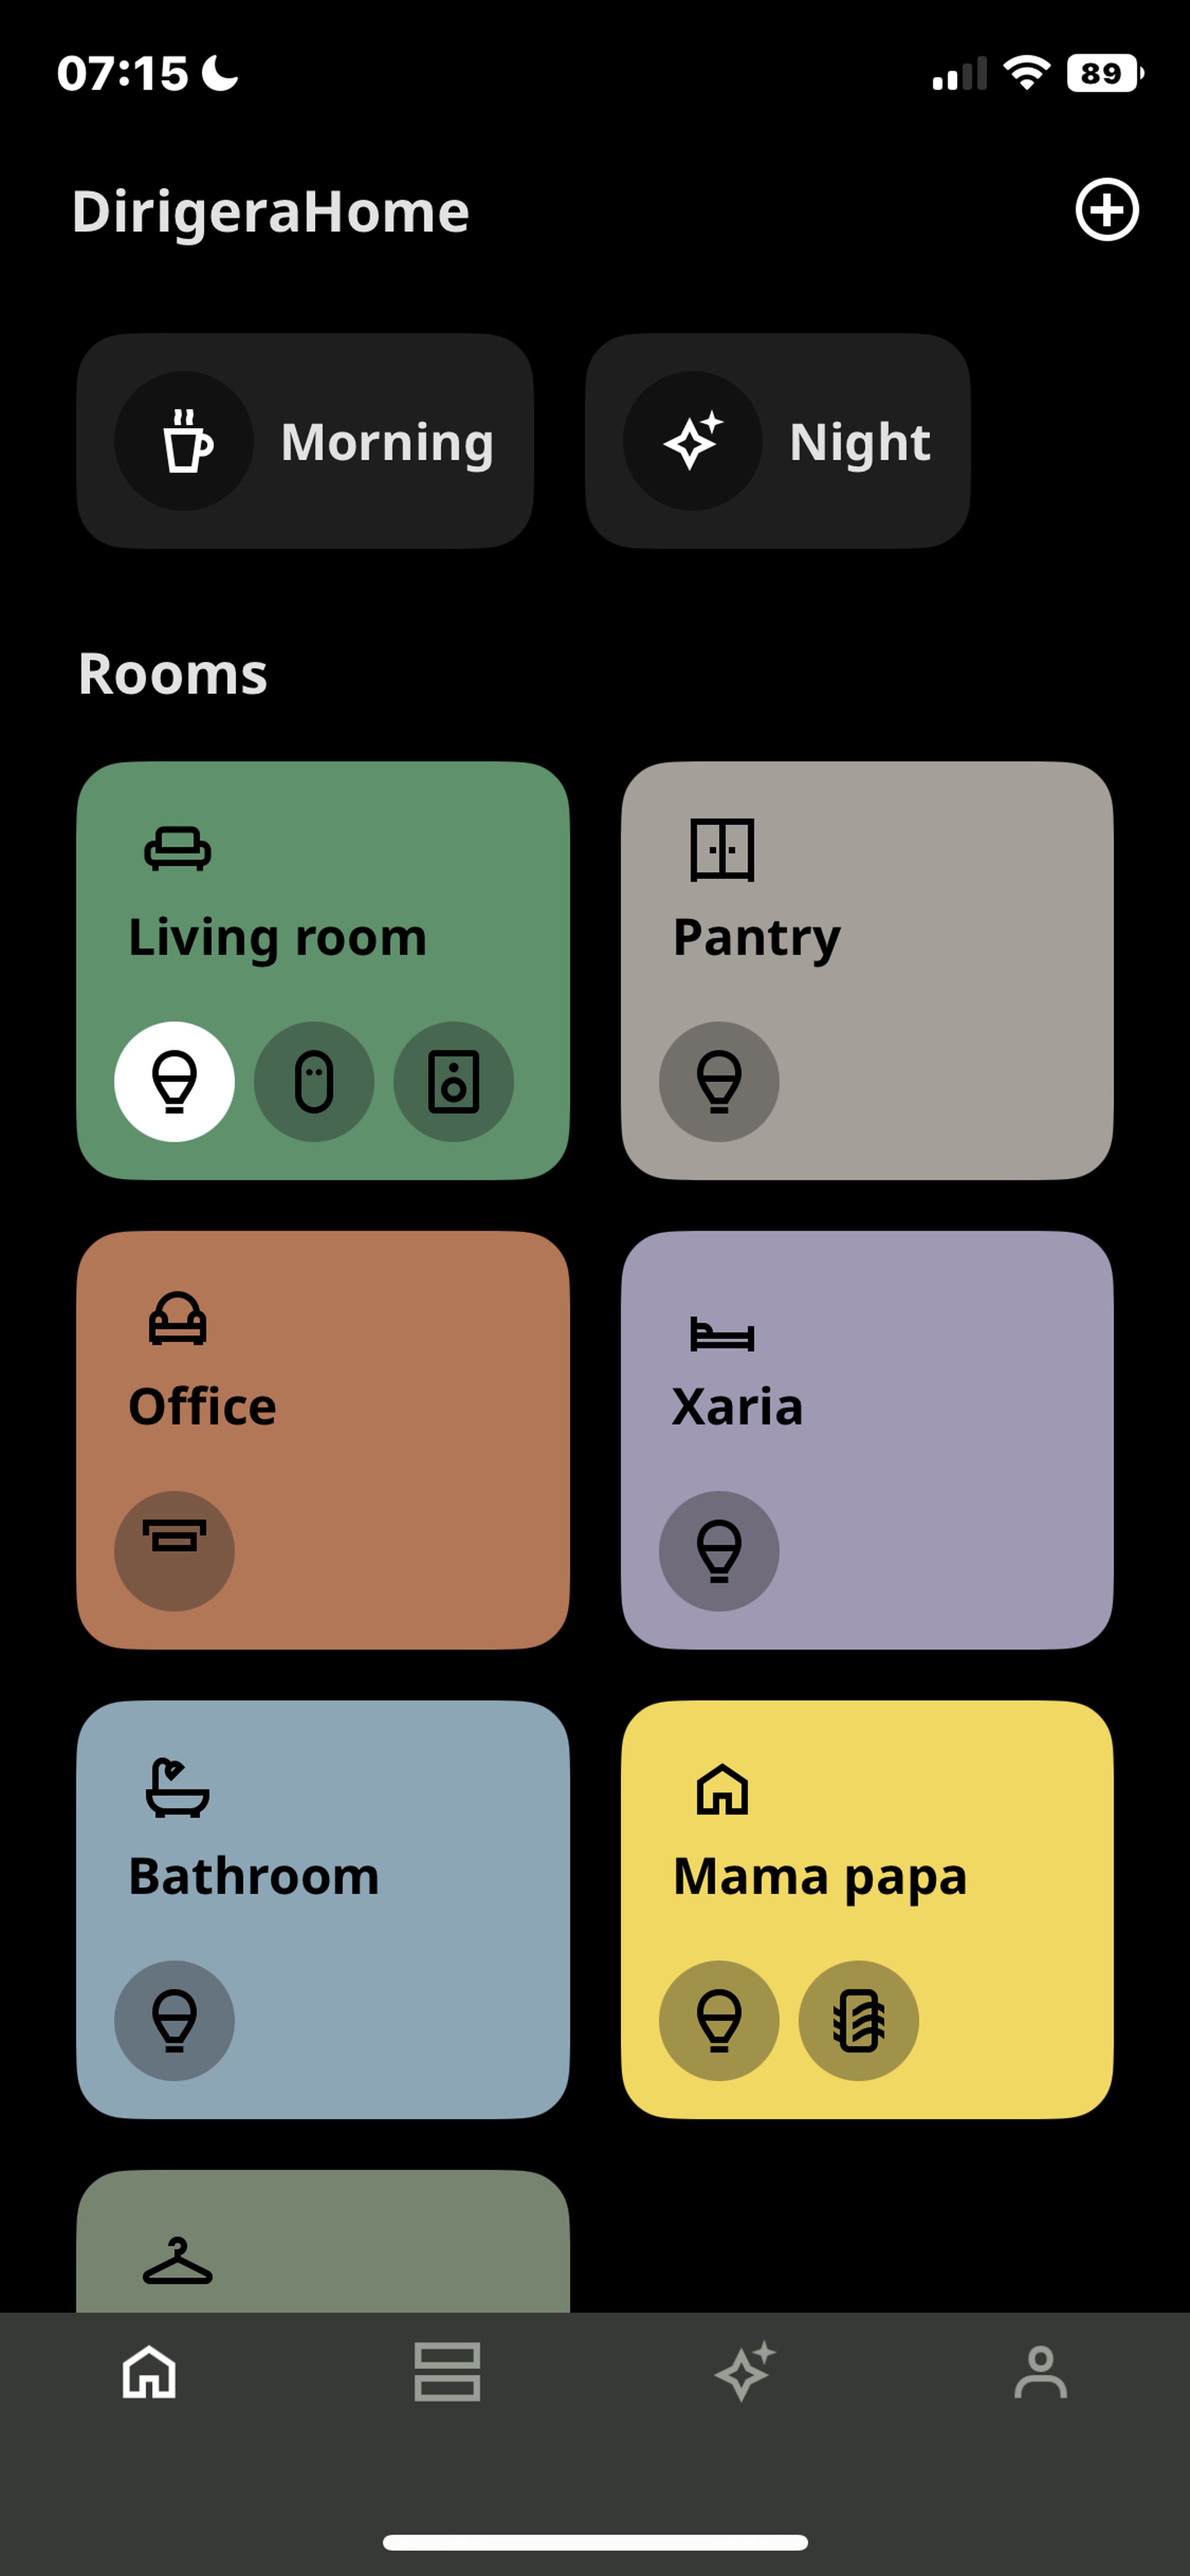 Ikea’s new Home smart app is now organized around rooms.